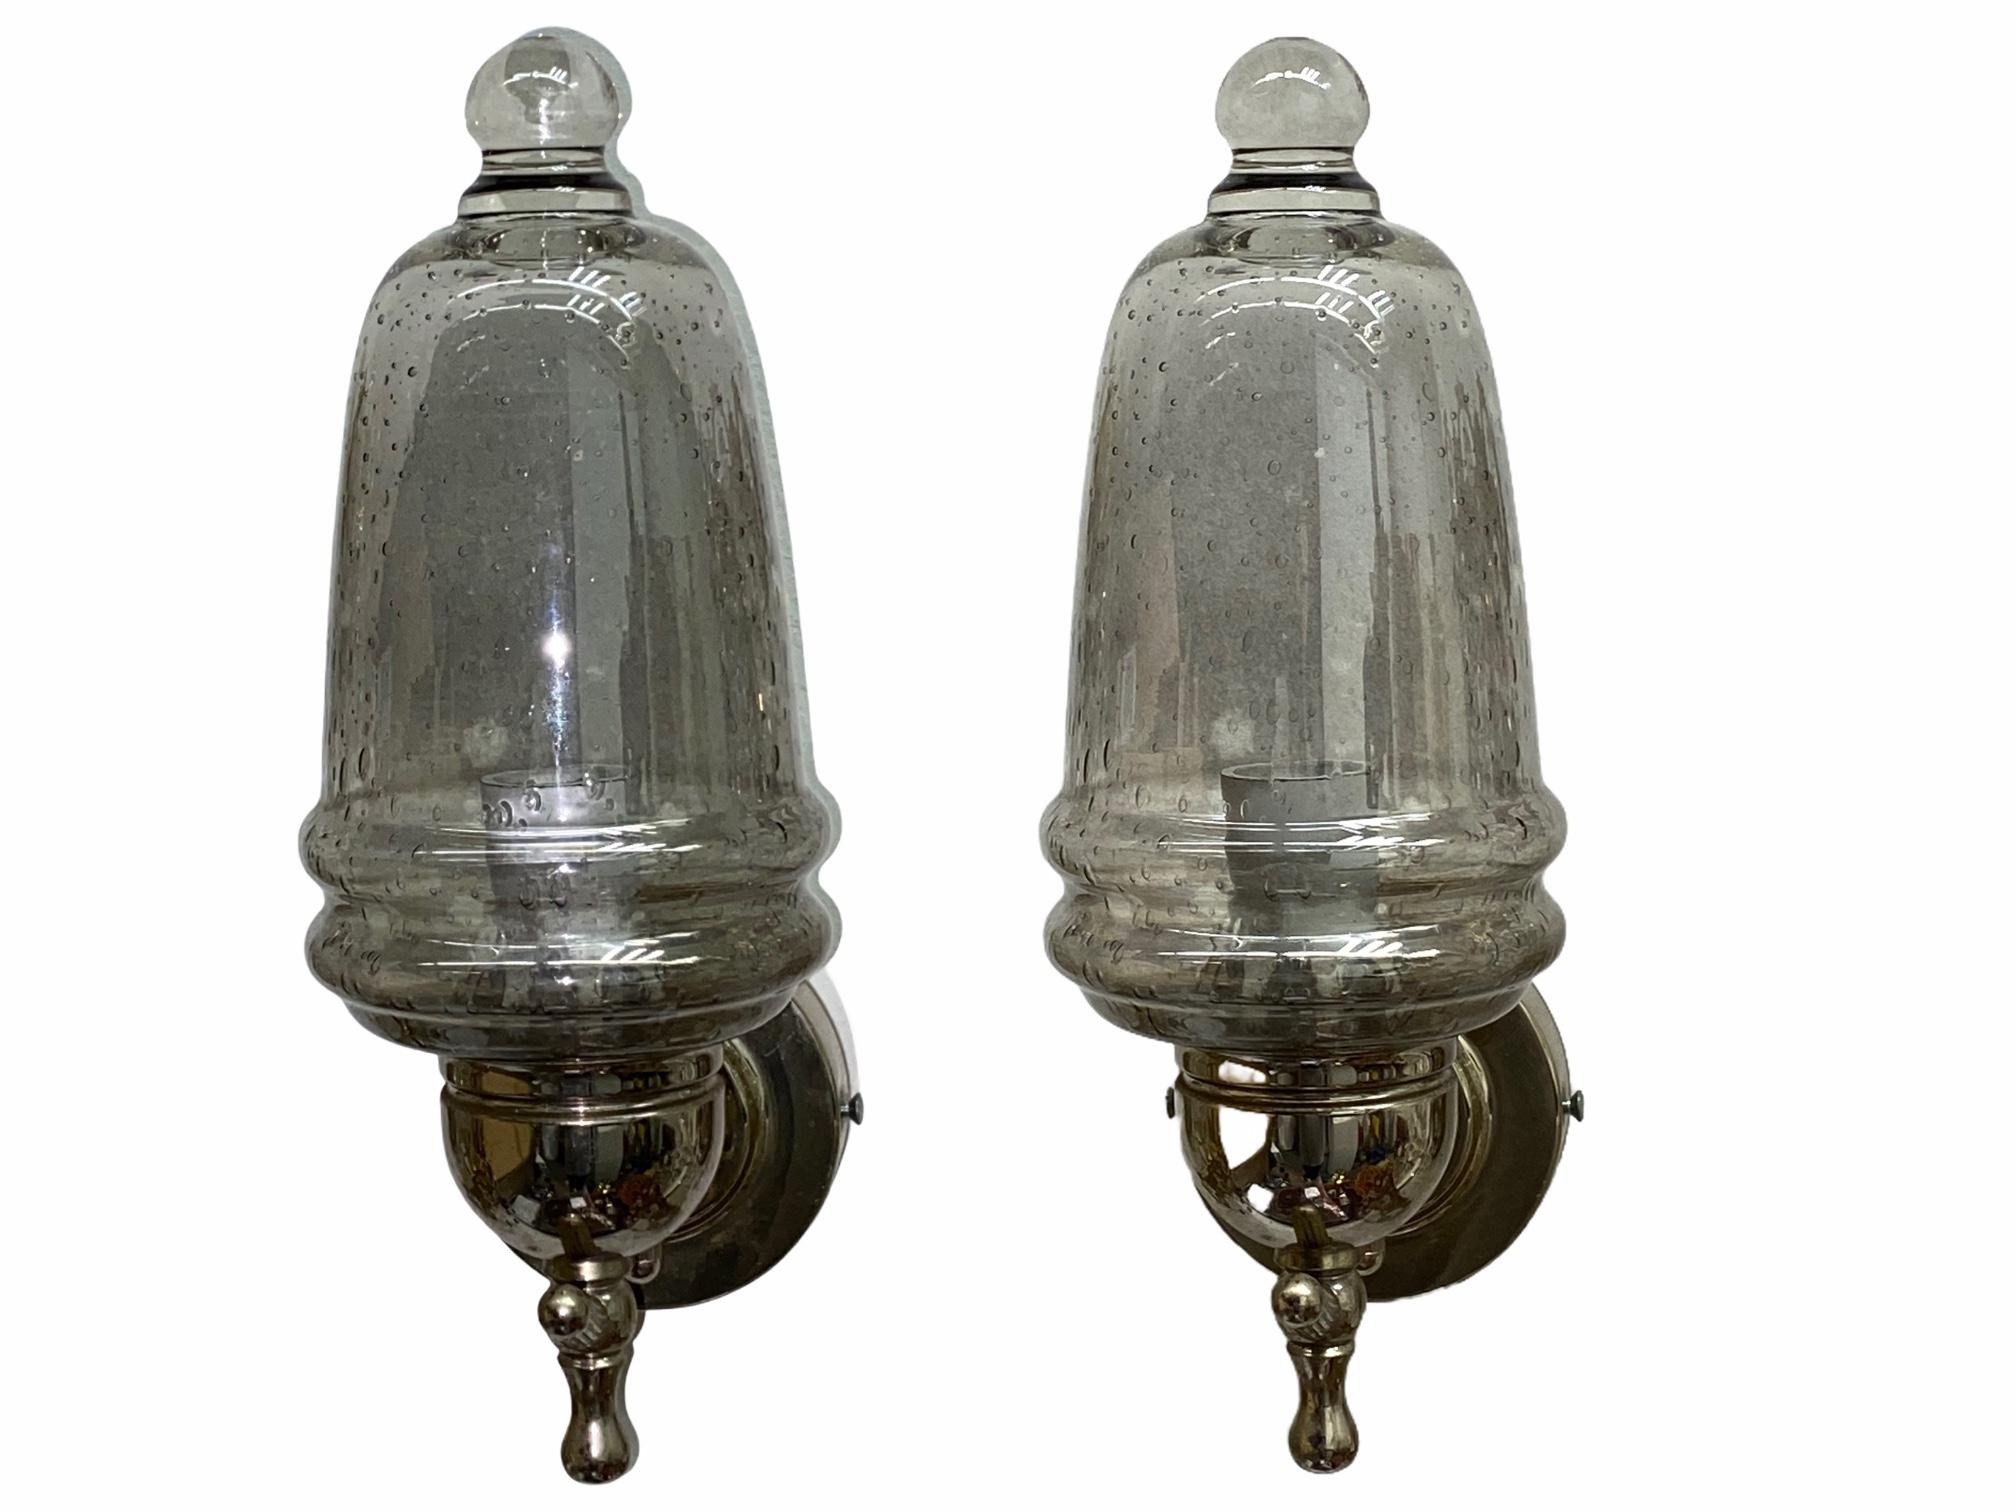 Pair of 1960s Wall Sconces in the Style of Hans - Agne Jakobsson, Skandinavia For Sale 4